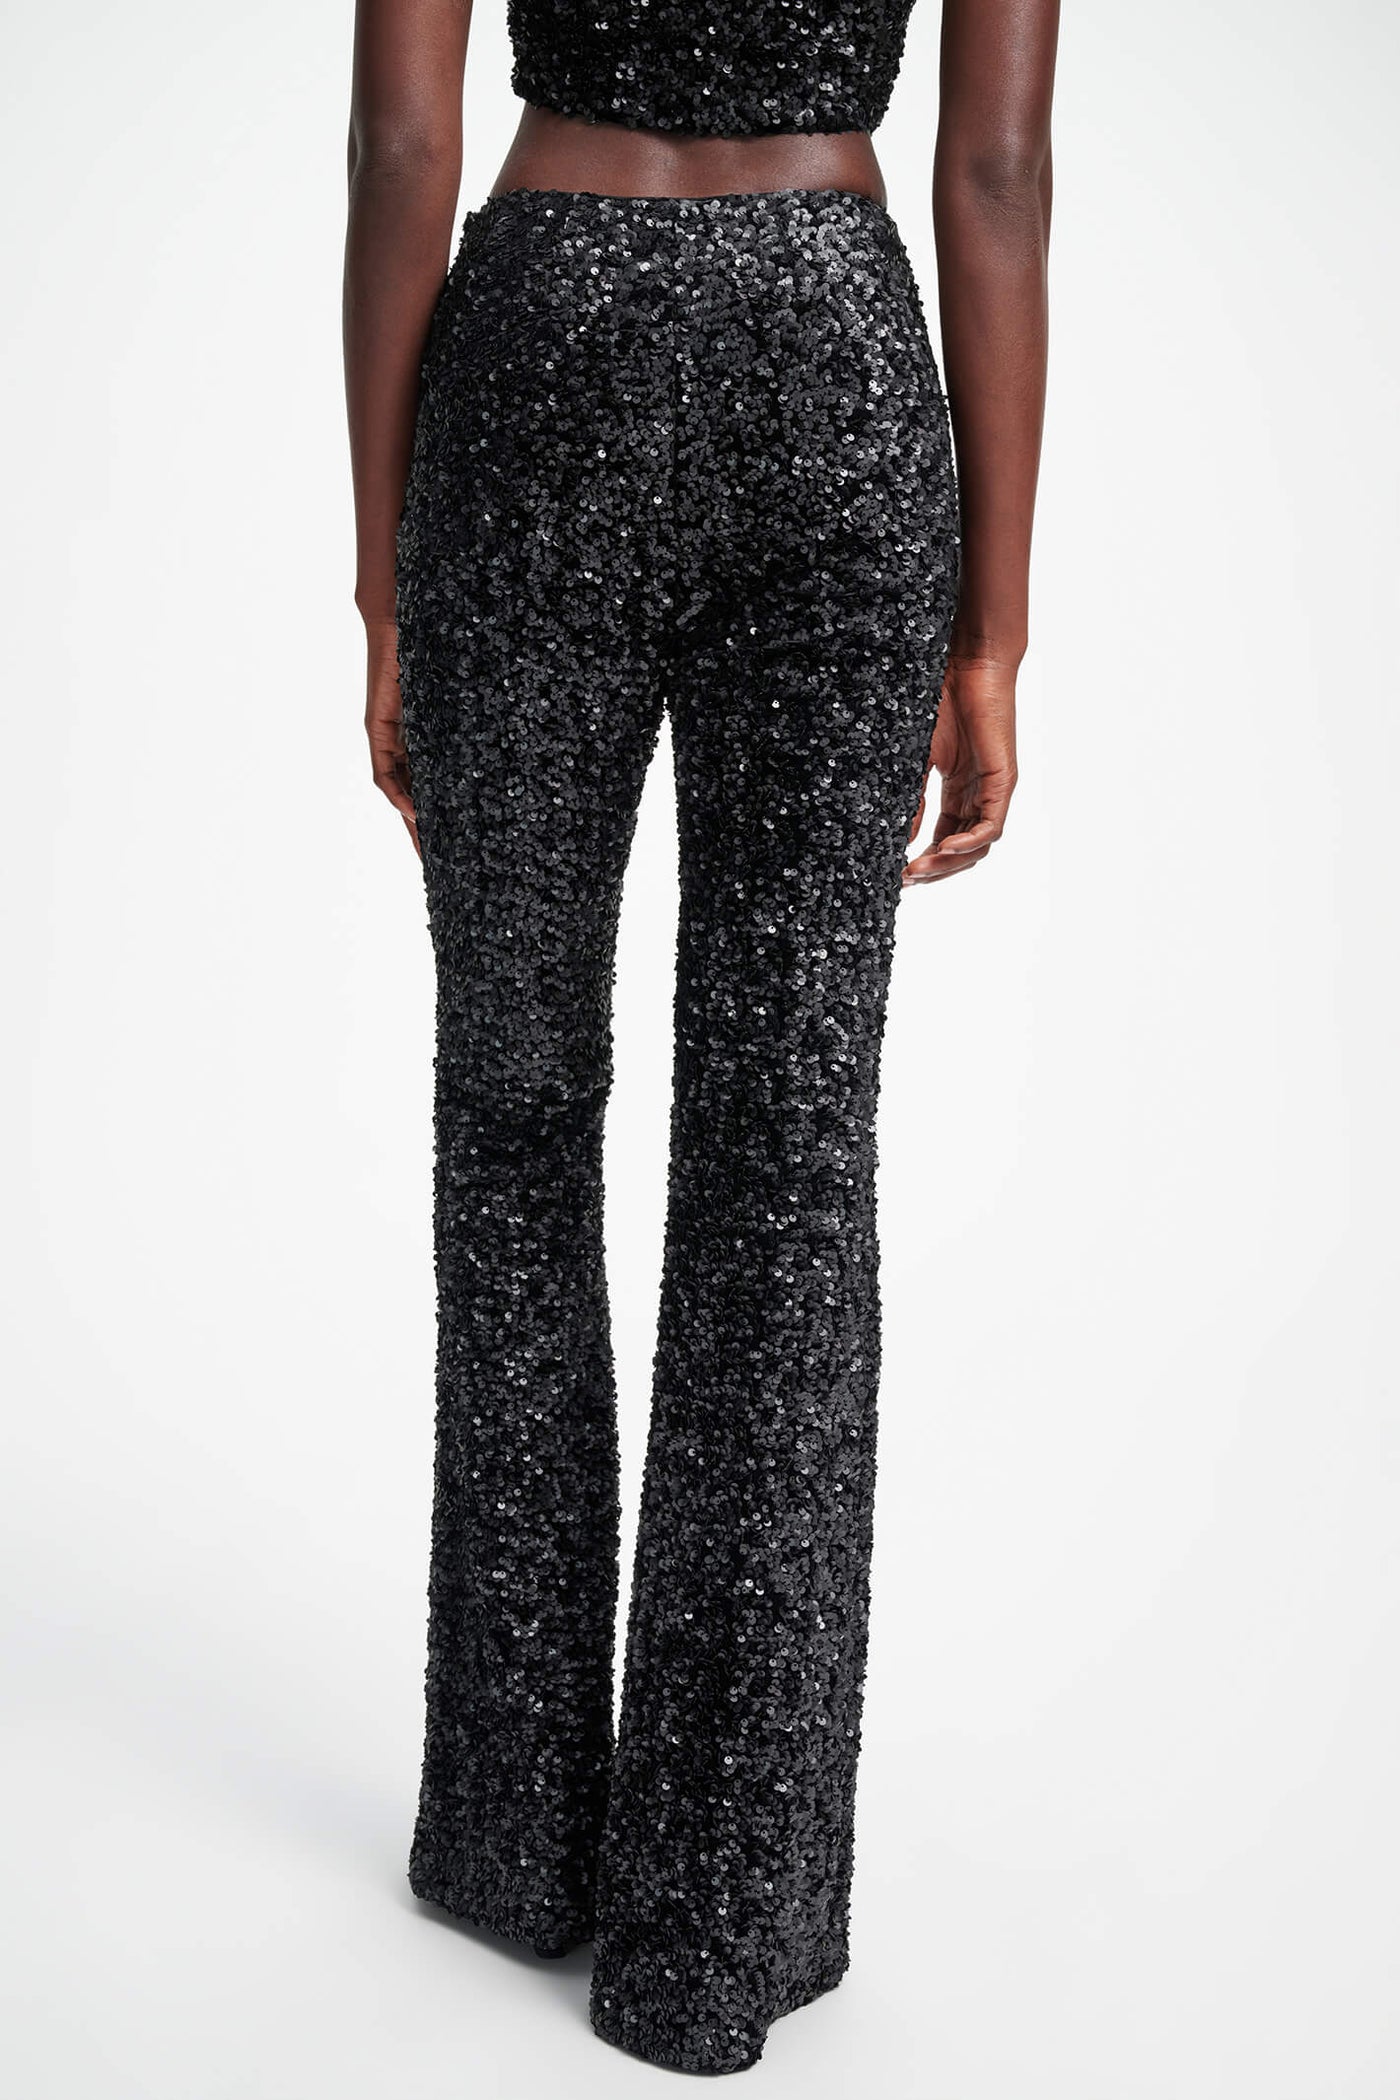 Dorothee Schumacher Shimmering Attraction 848103 Charcoal Black Trousers - Lonah Boutique